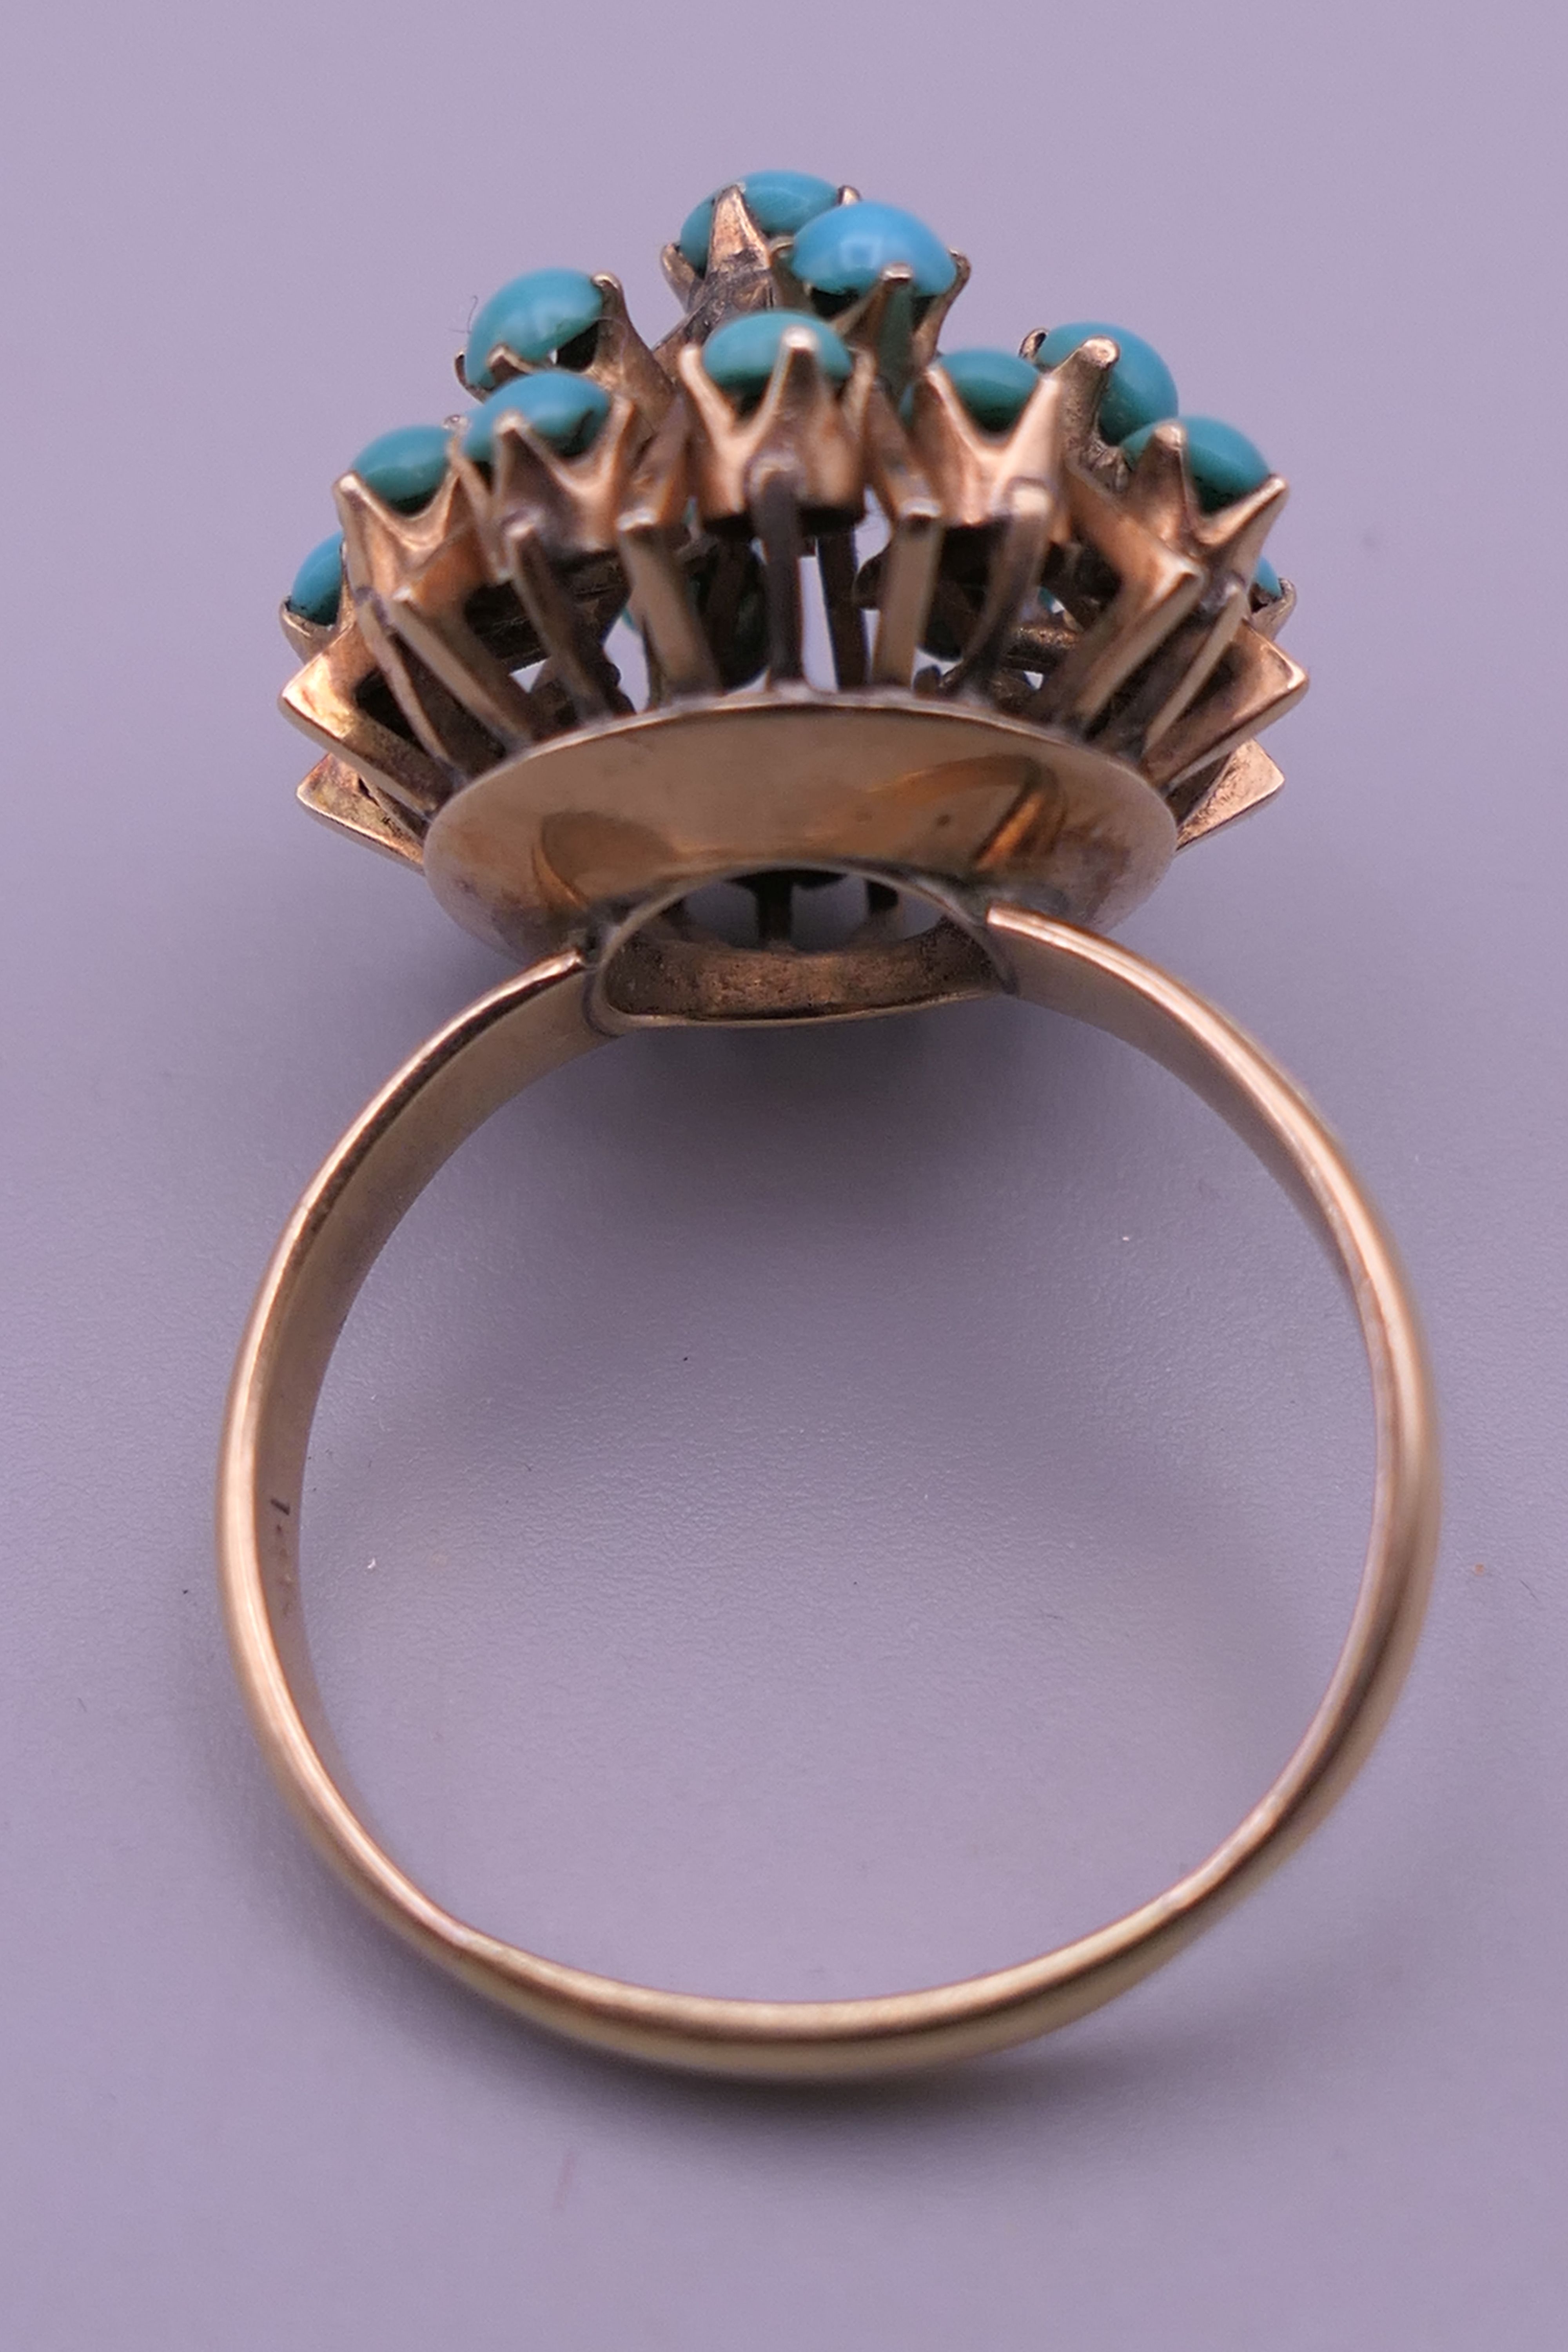 A 14 K gold and turquoise ring. Ring size U. 7.5 grammes total weight. - Image 7 of 8